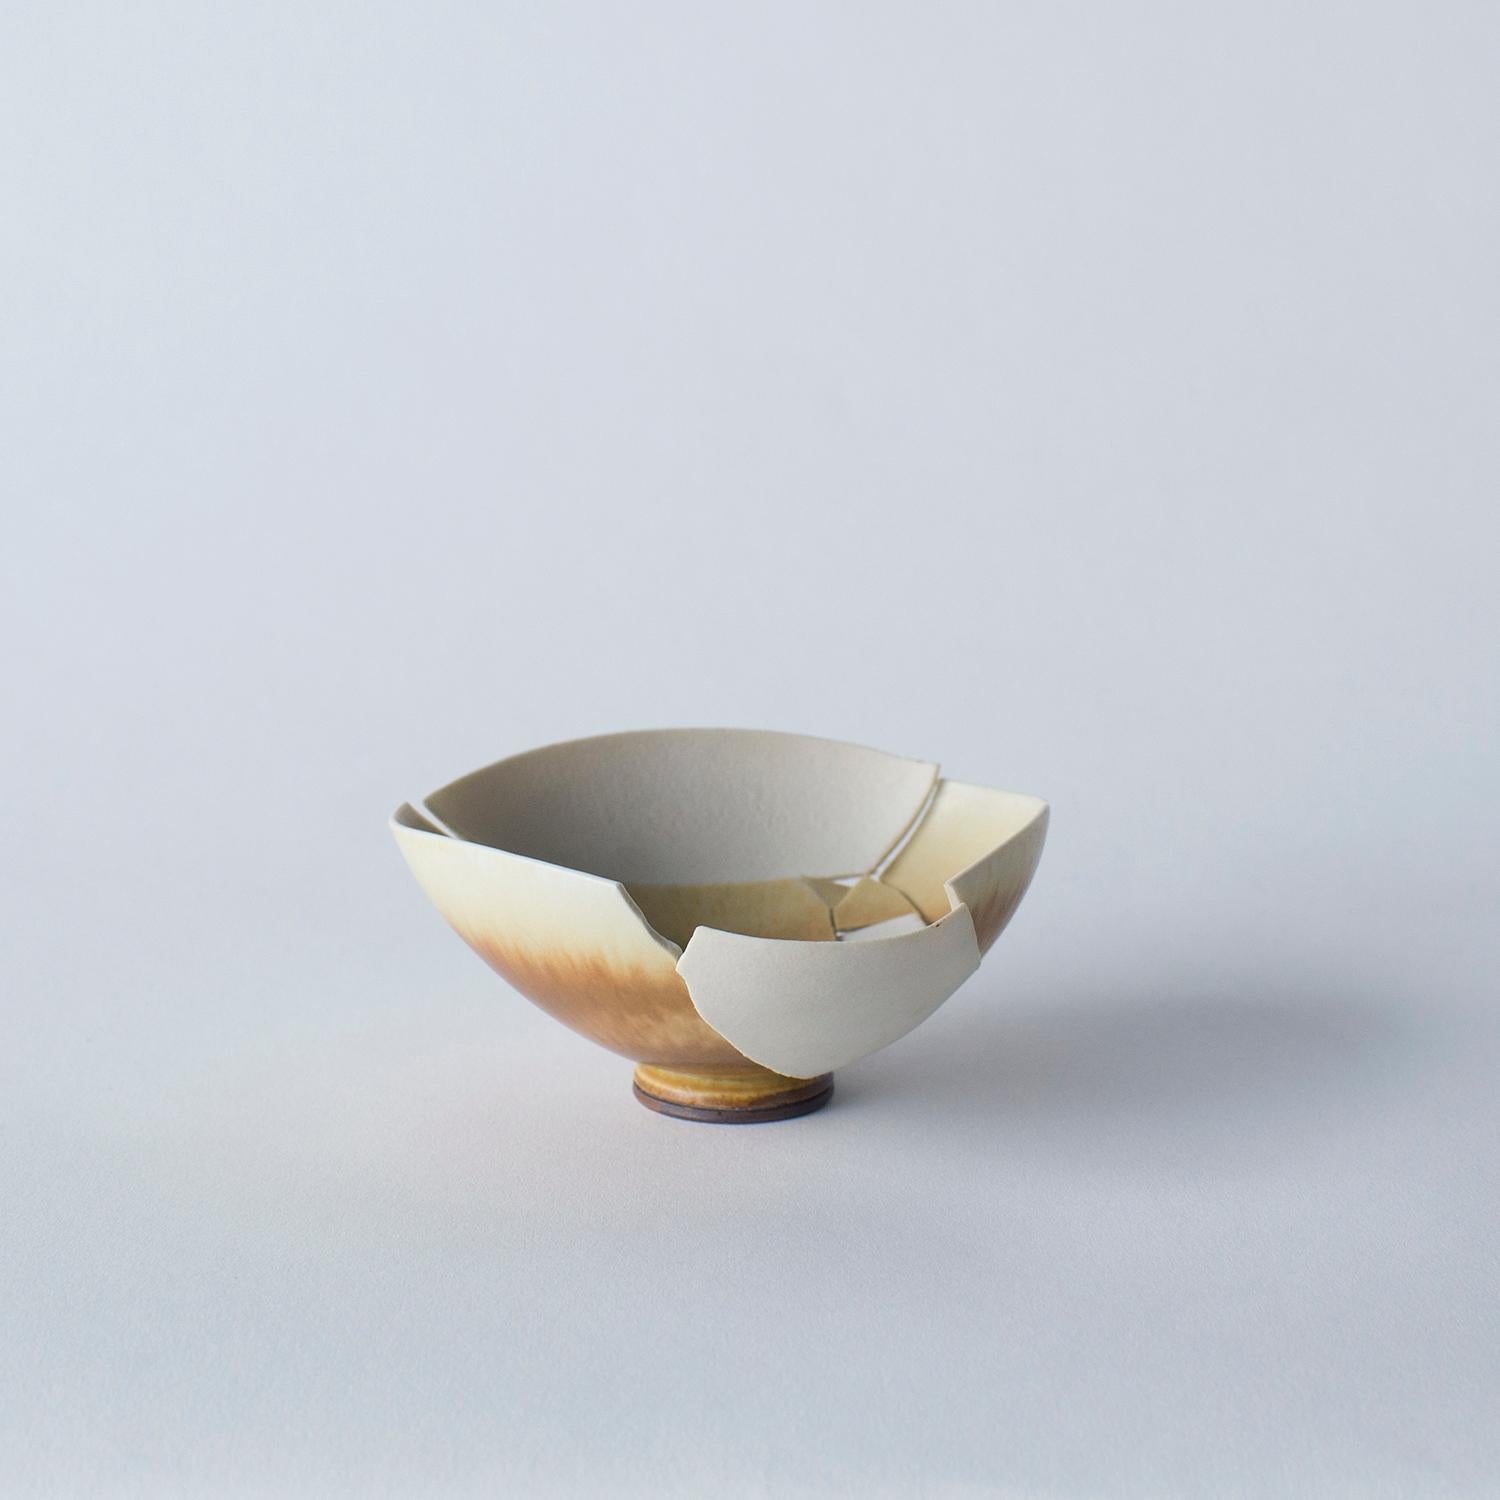 This series is made up of some glass and some ceramic works. These works are highly unique form and looking. Norihiko Terayama created them from damaged vases, coffee cups and so on. He start breaking damaged object into some fragments. Some of